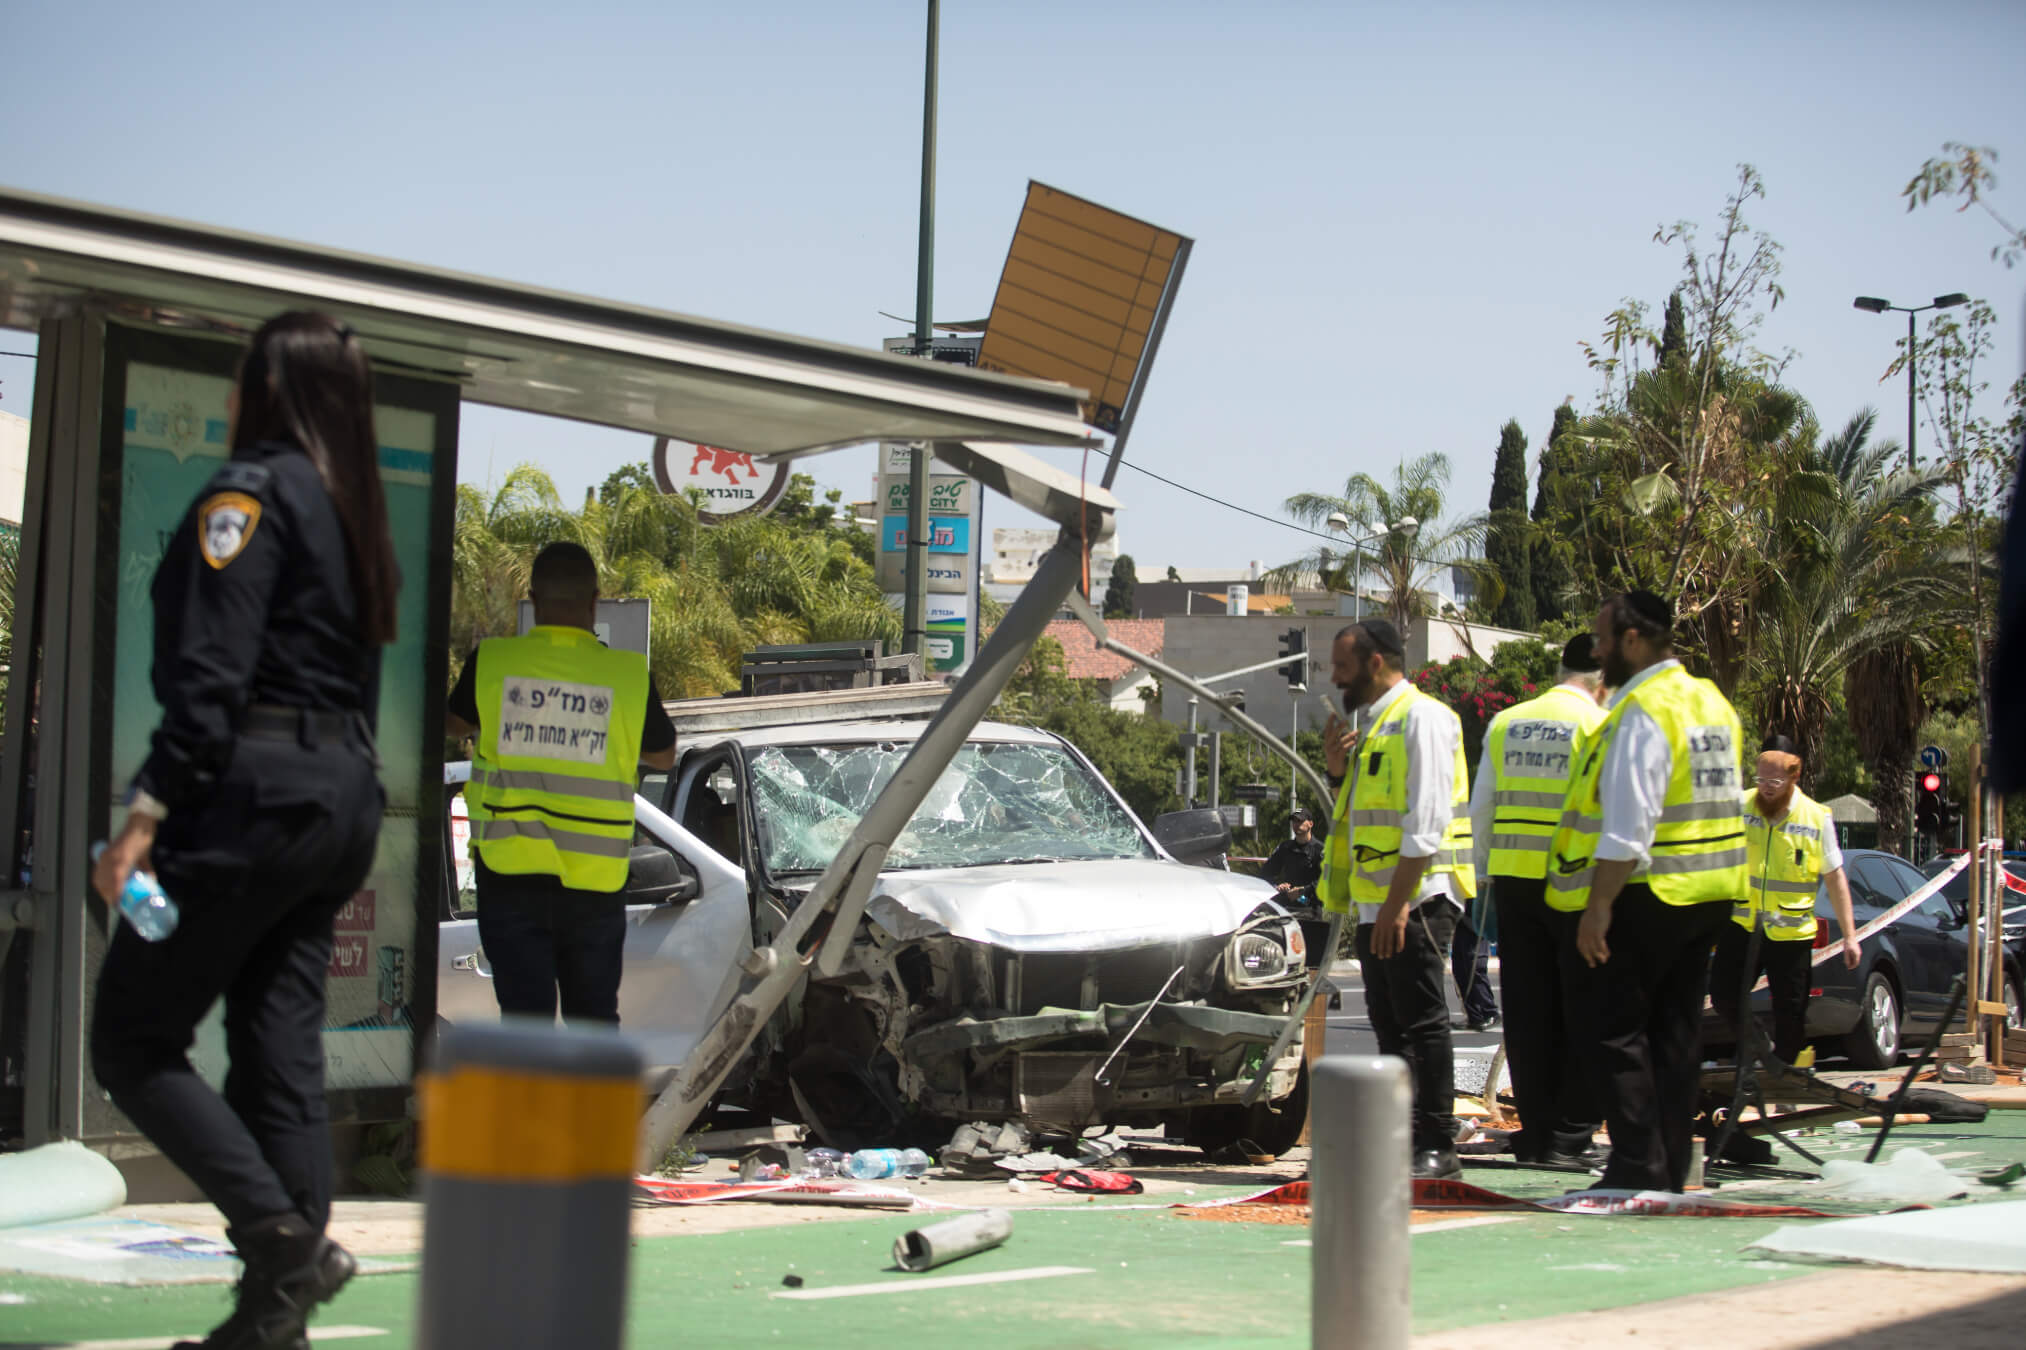 Israeli security and rescue forces examine the scene of a terror attack on July 4, 2023 in Tel Aviv, Israel. Seven people were injured after a car rammed into pedestrians, the driver then stabbed several people before being neutralised, according to Israeli officials. 